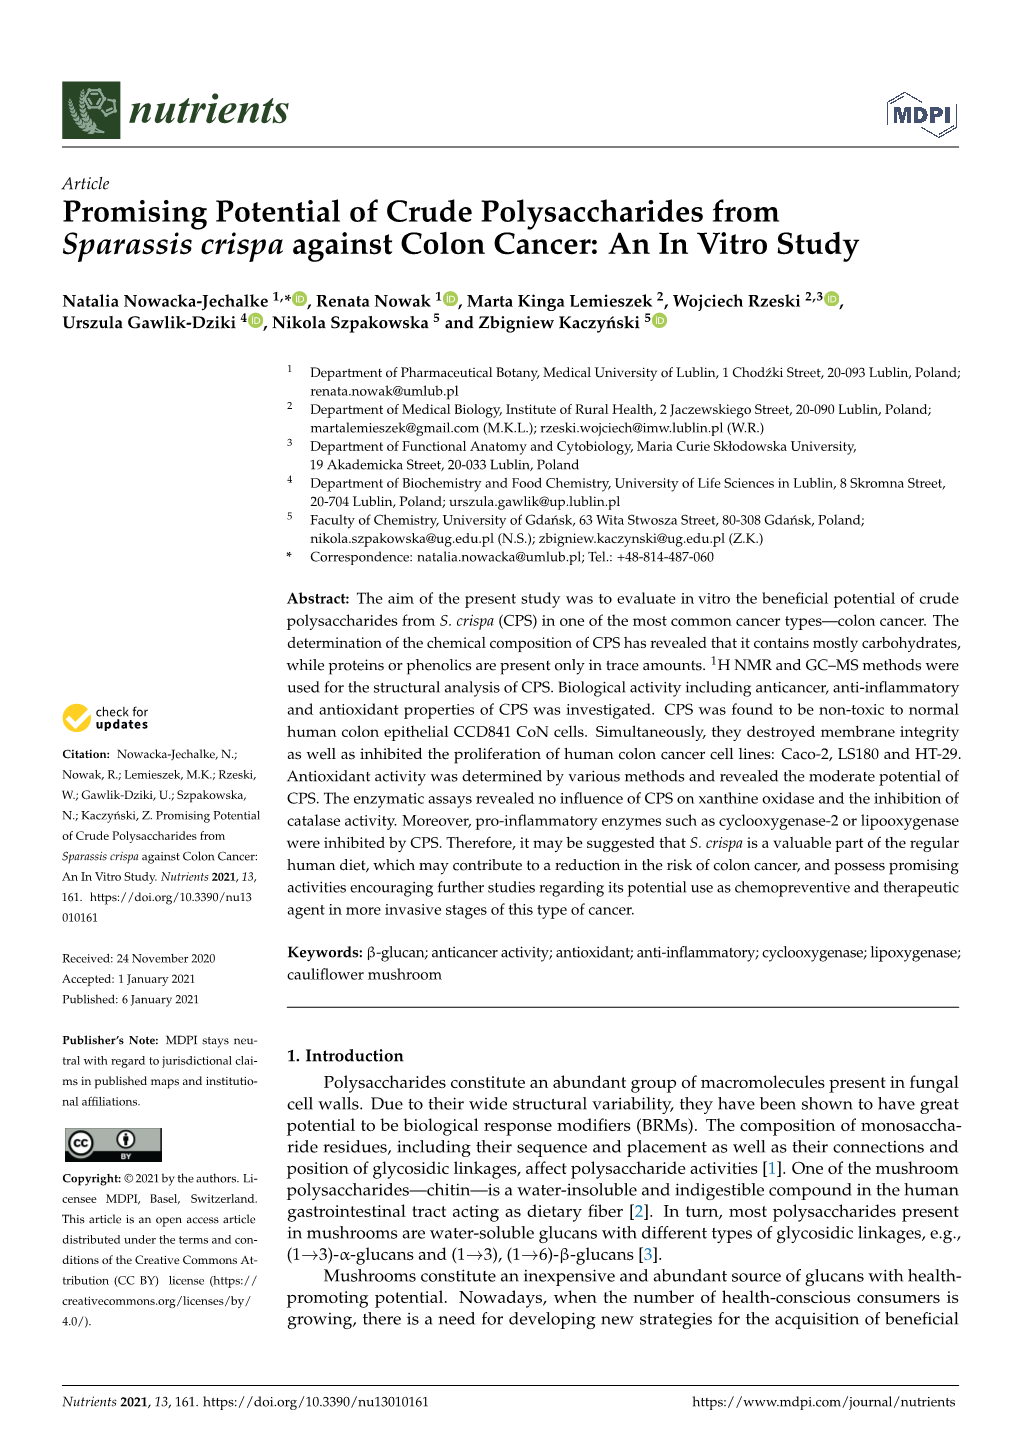 Promising Potential of Crude Polysaccharides from Sparassis Crispa Against Colon Cancer: an in Vitro Study